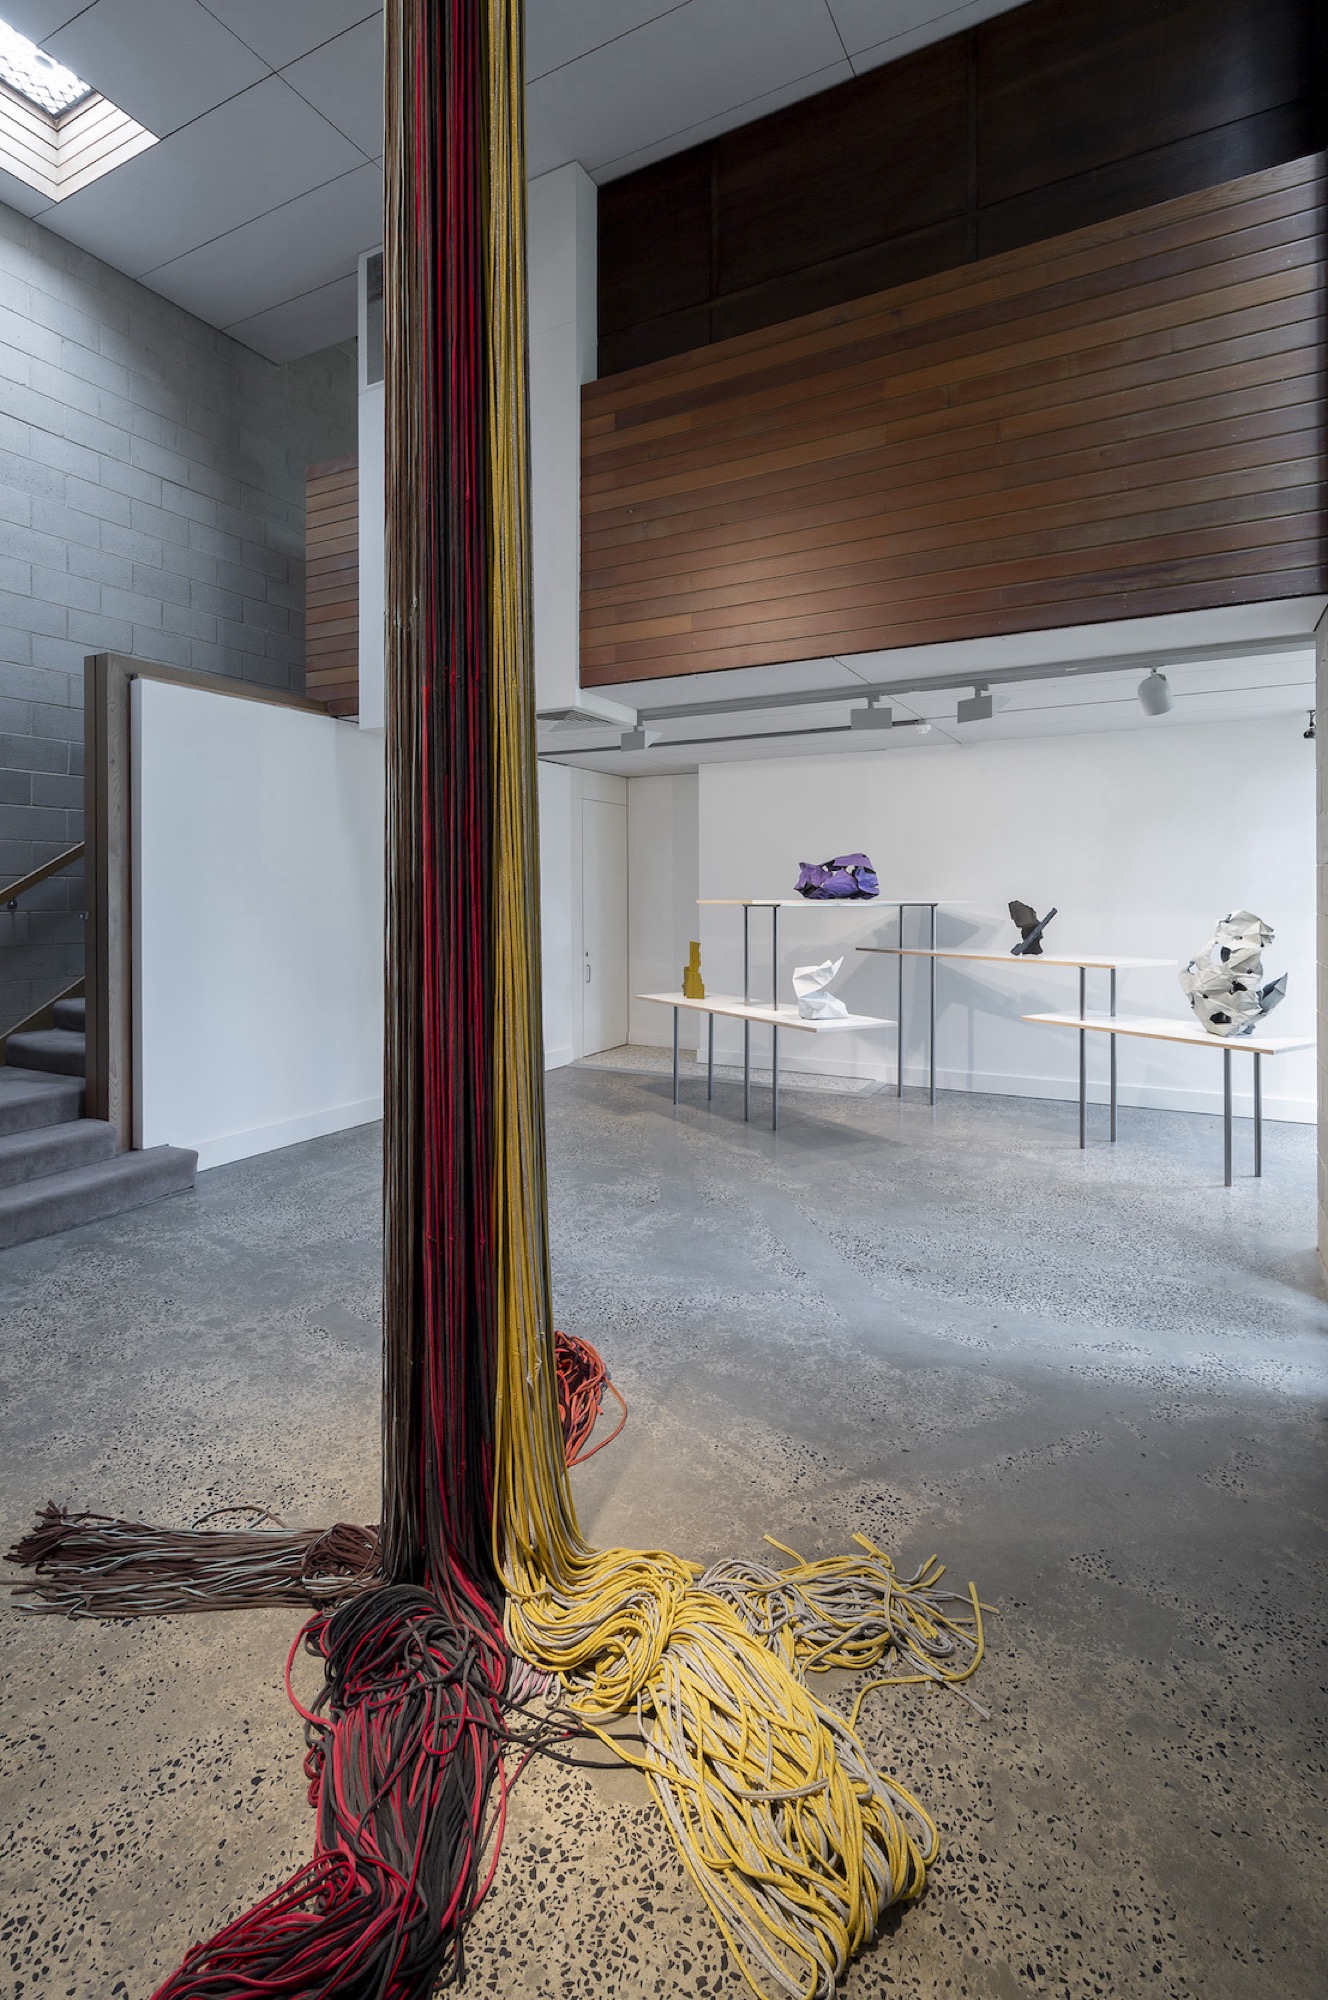 Installation view of Anne-Marie May, <em>Inside Out: Space and Process</em>, 2020, Courtesy McClelland Sculpture Park + Gallery. Photo: Christian Capurro